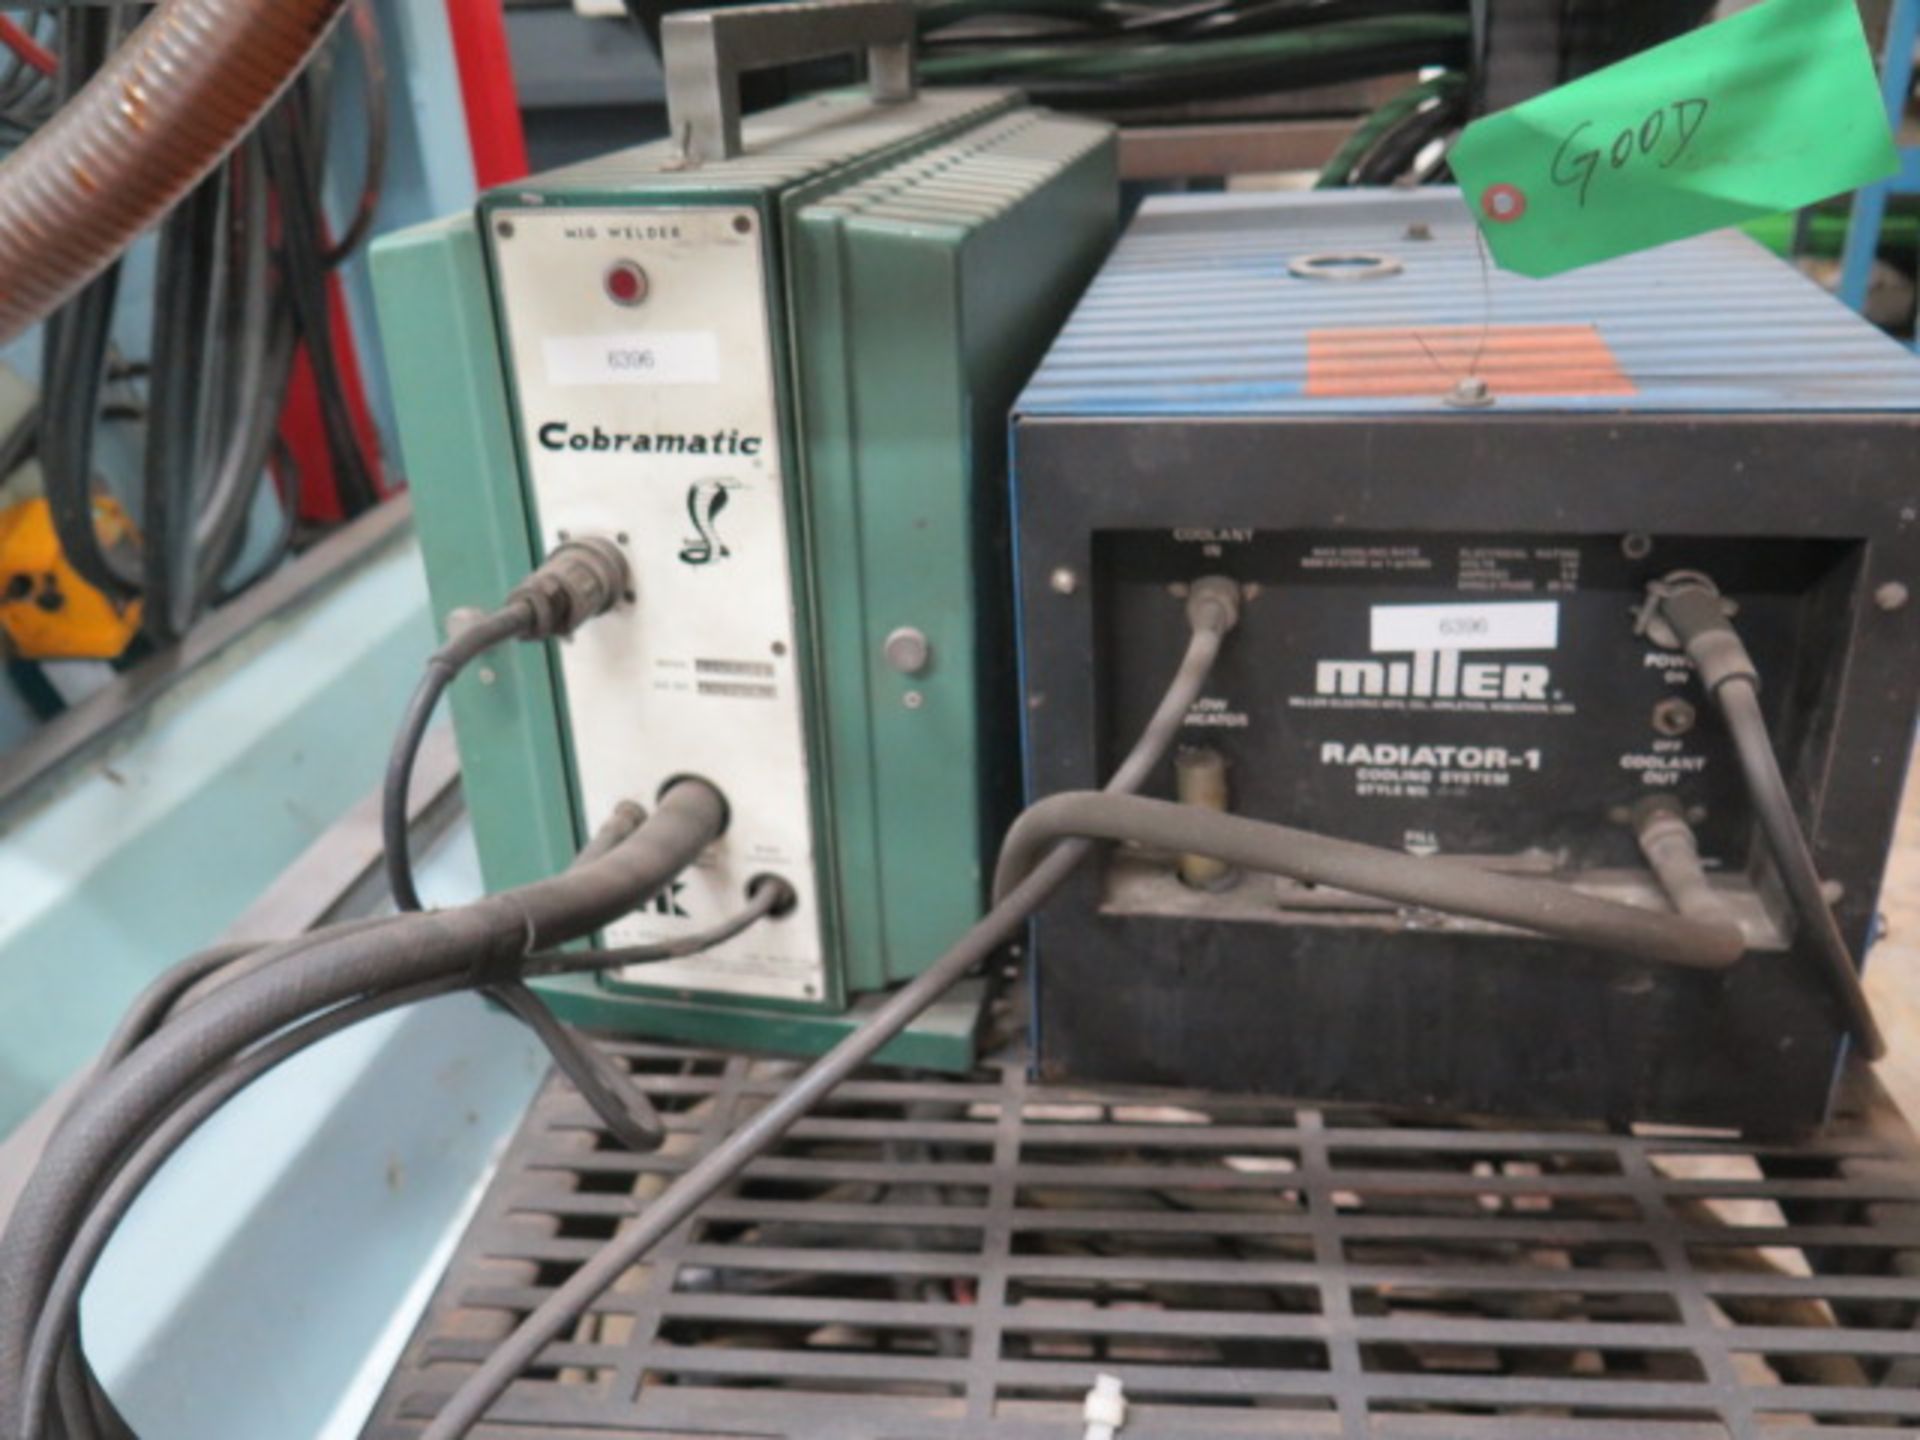 MK Cobramatic MIG Welder and Miller Radiator-1 Cooling Unit w/ Cart (SOLD AS-IS - NO WARRANTY) - Image 2 of 7